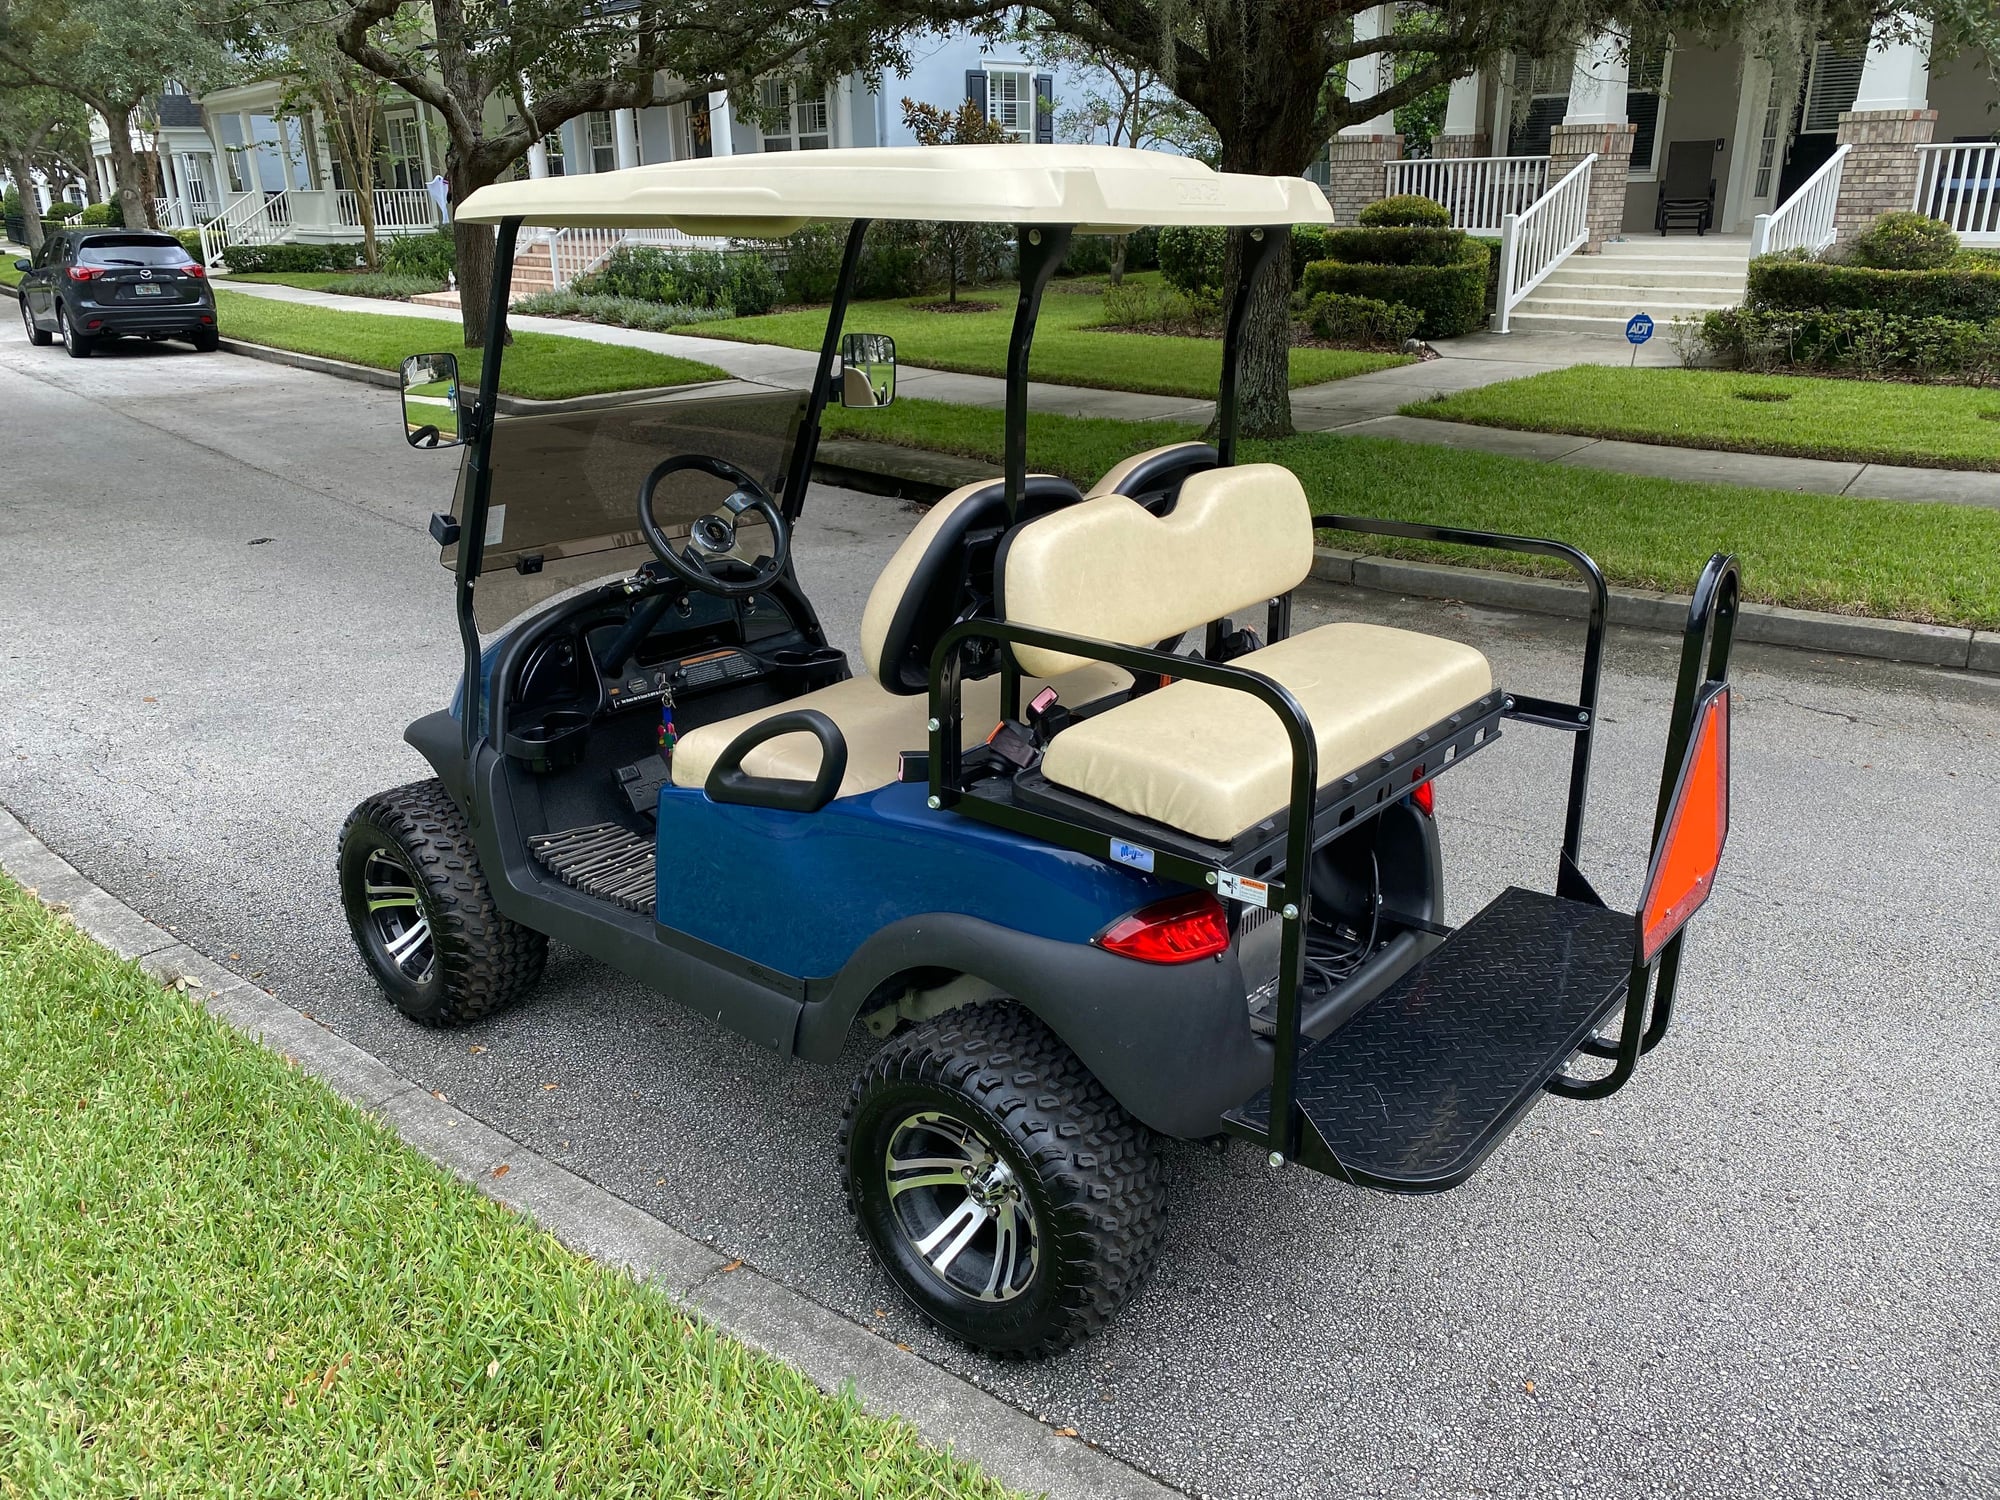 Golf cart club car - The Hull Truth - Boating and Fishing Forum